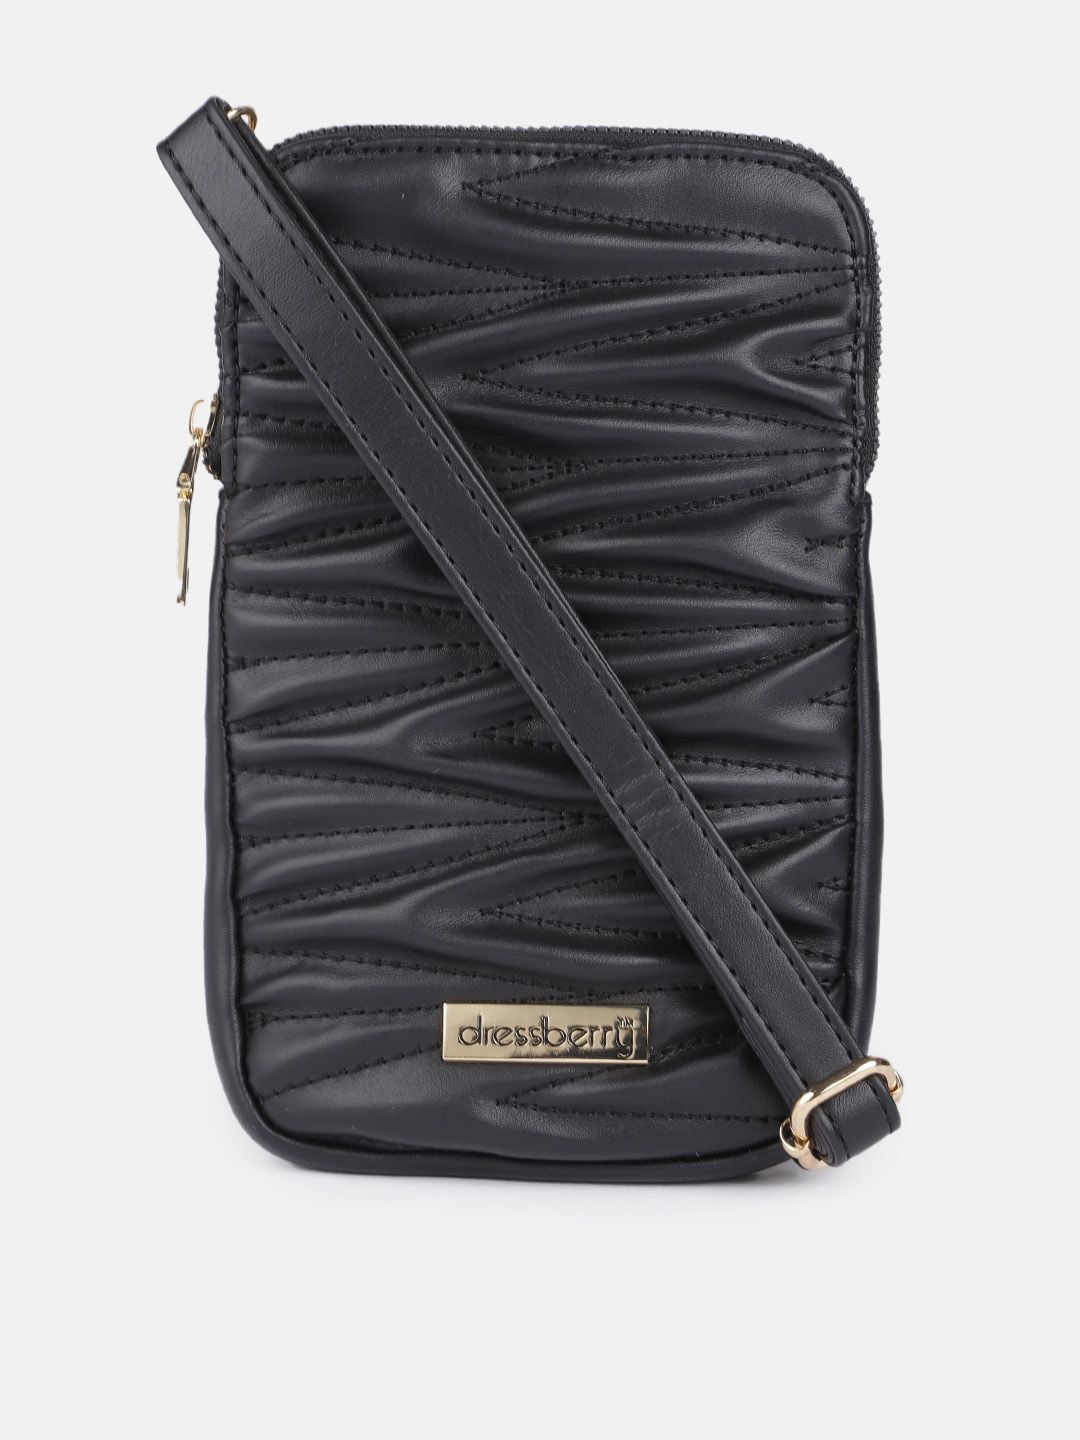 DressBerry Black Textured PU Structured Sling Bag Price in India